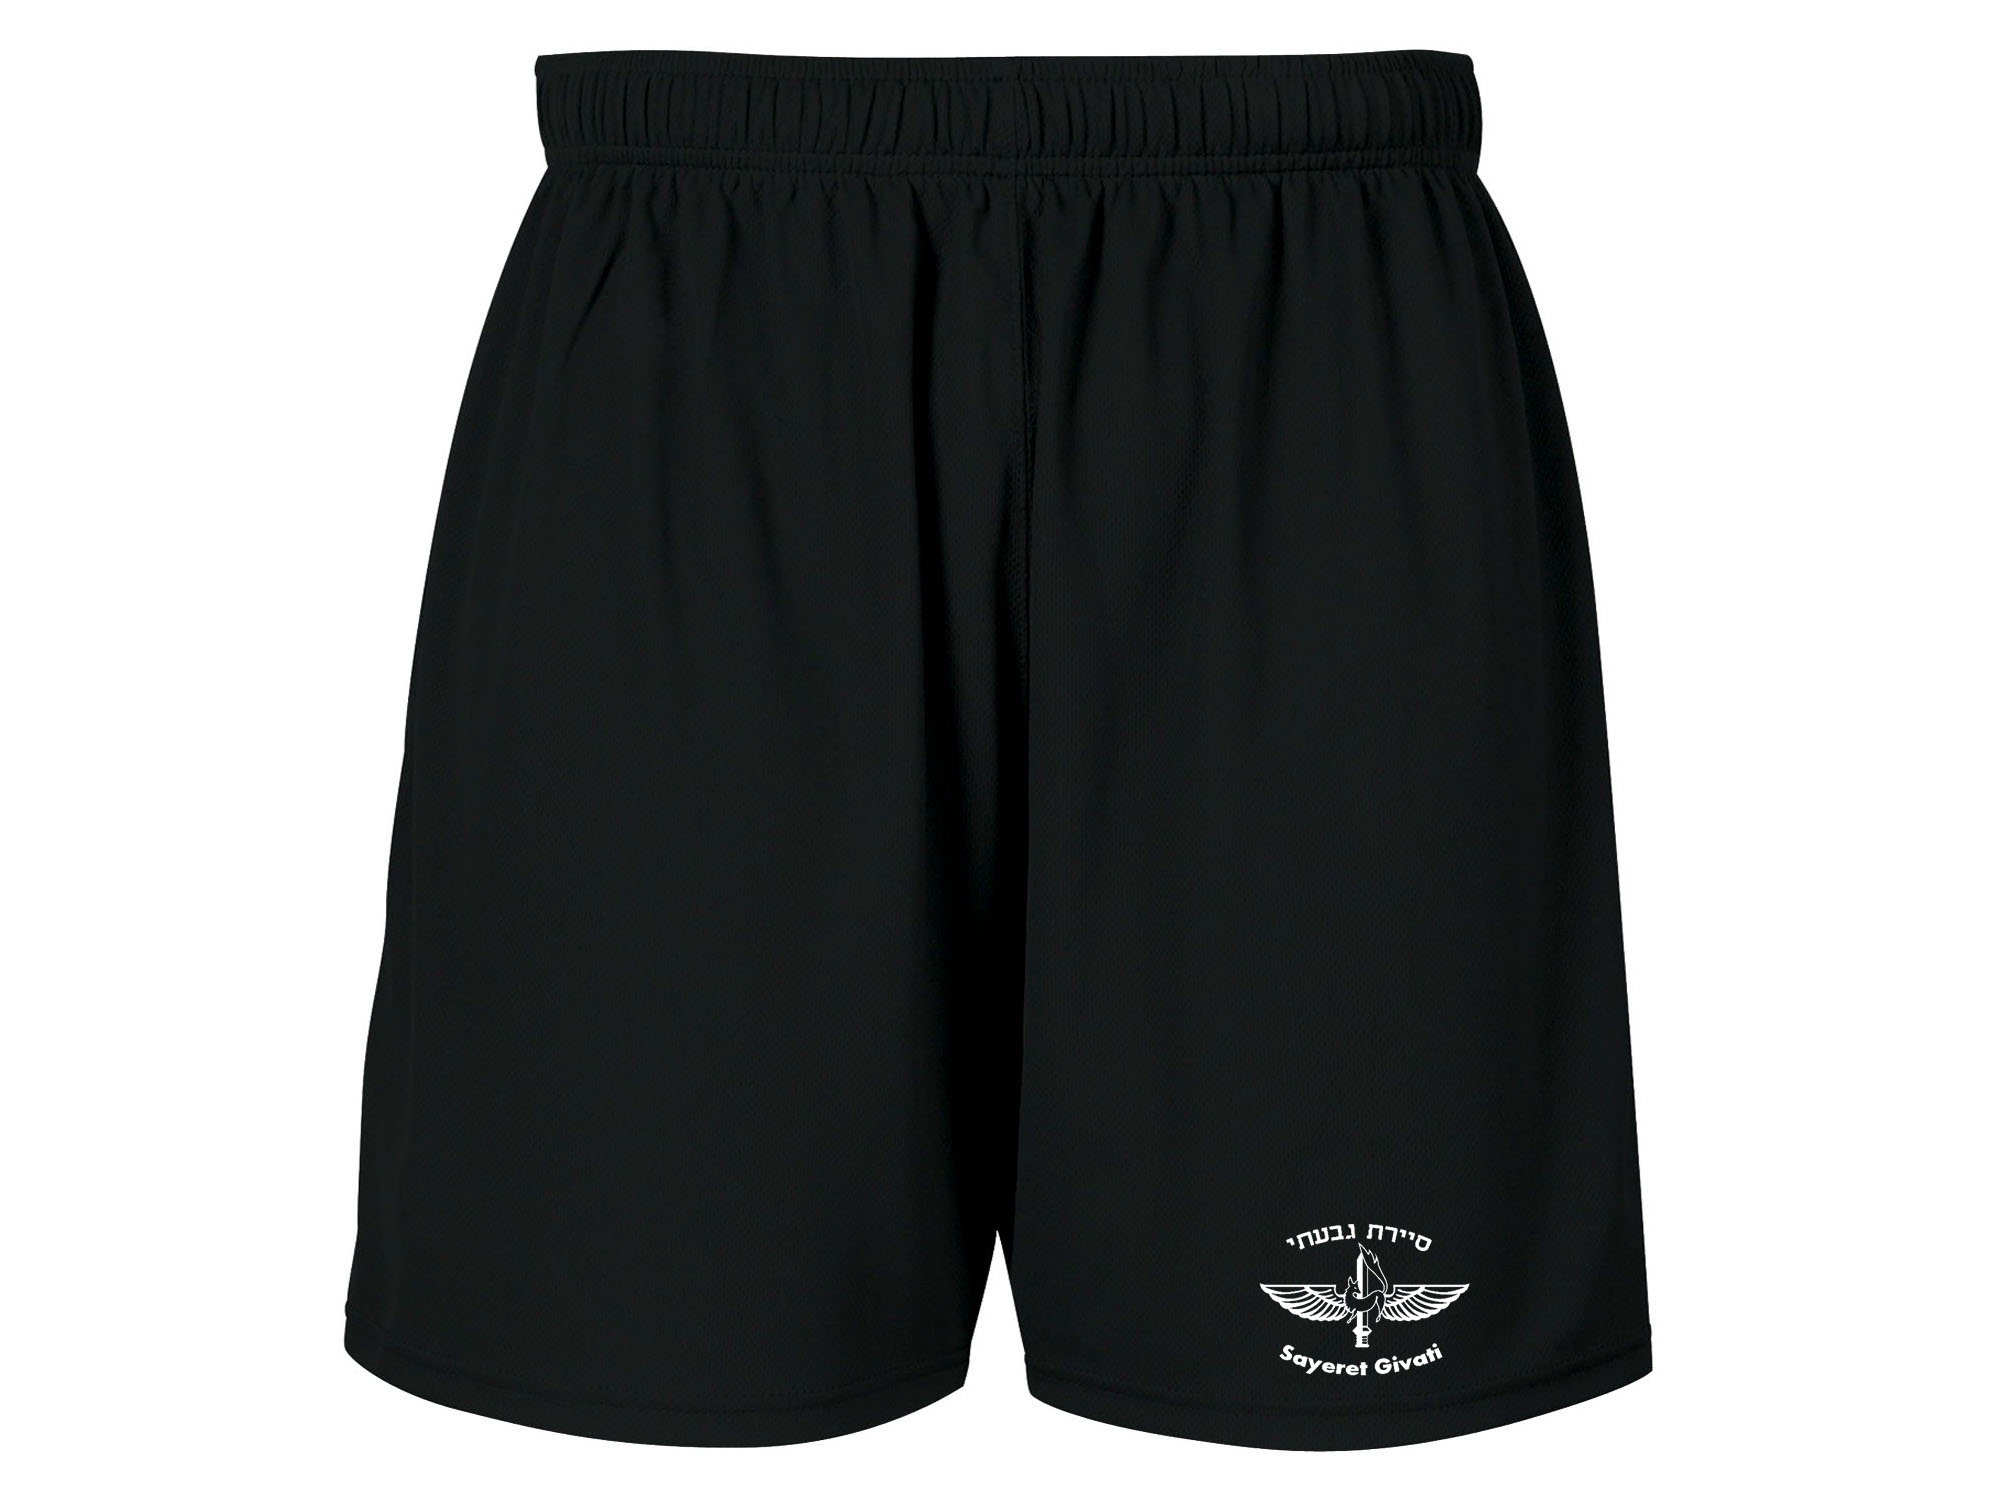 Israel army Ops special force Sayeret Givati workout shorts